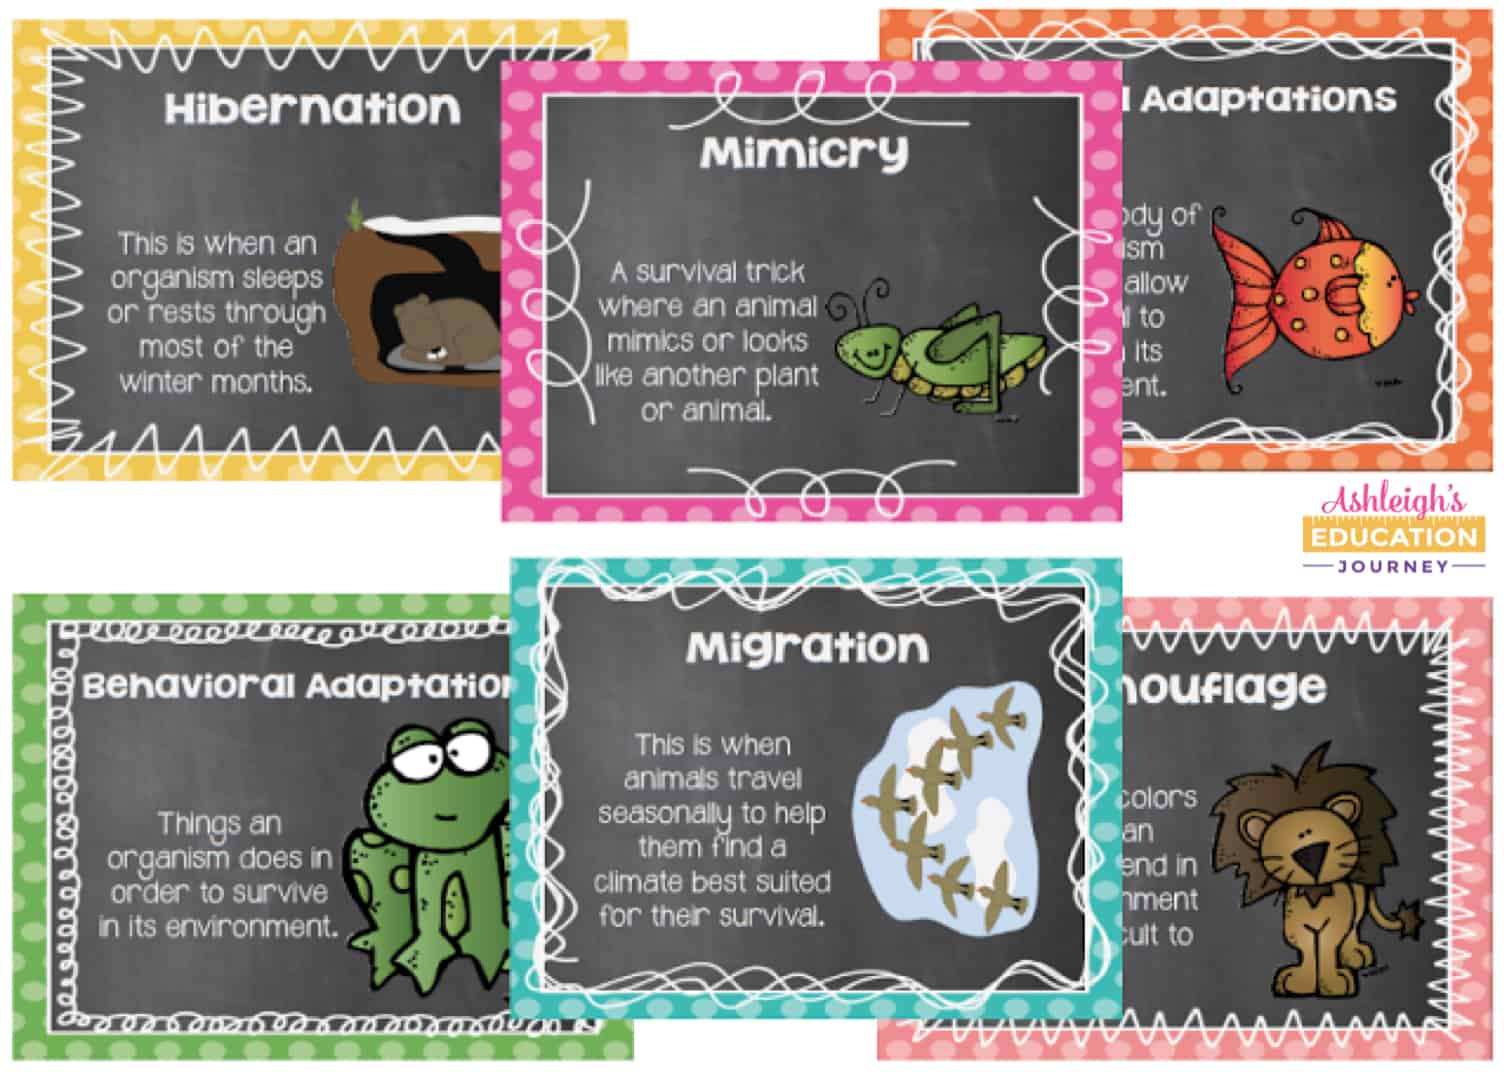 Animal Adaptations Lessons & Activities - Ashleigh's Education Journey